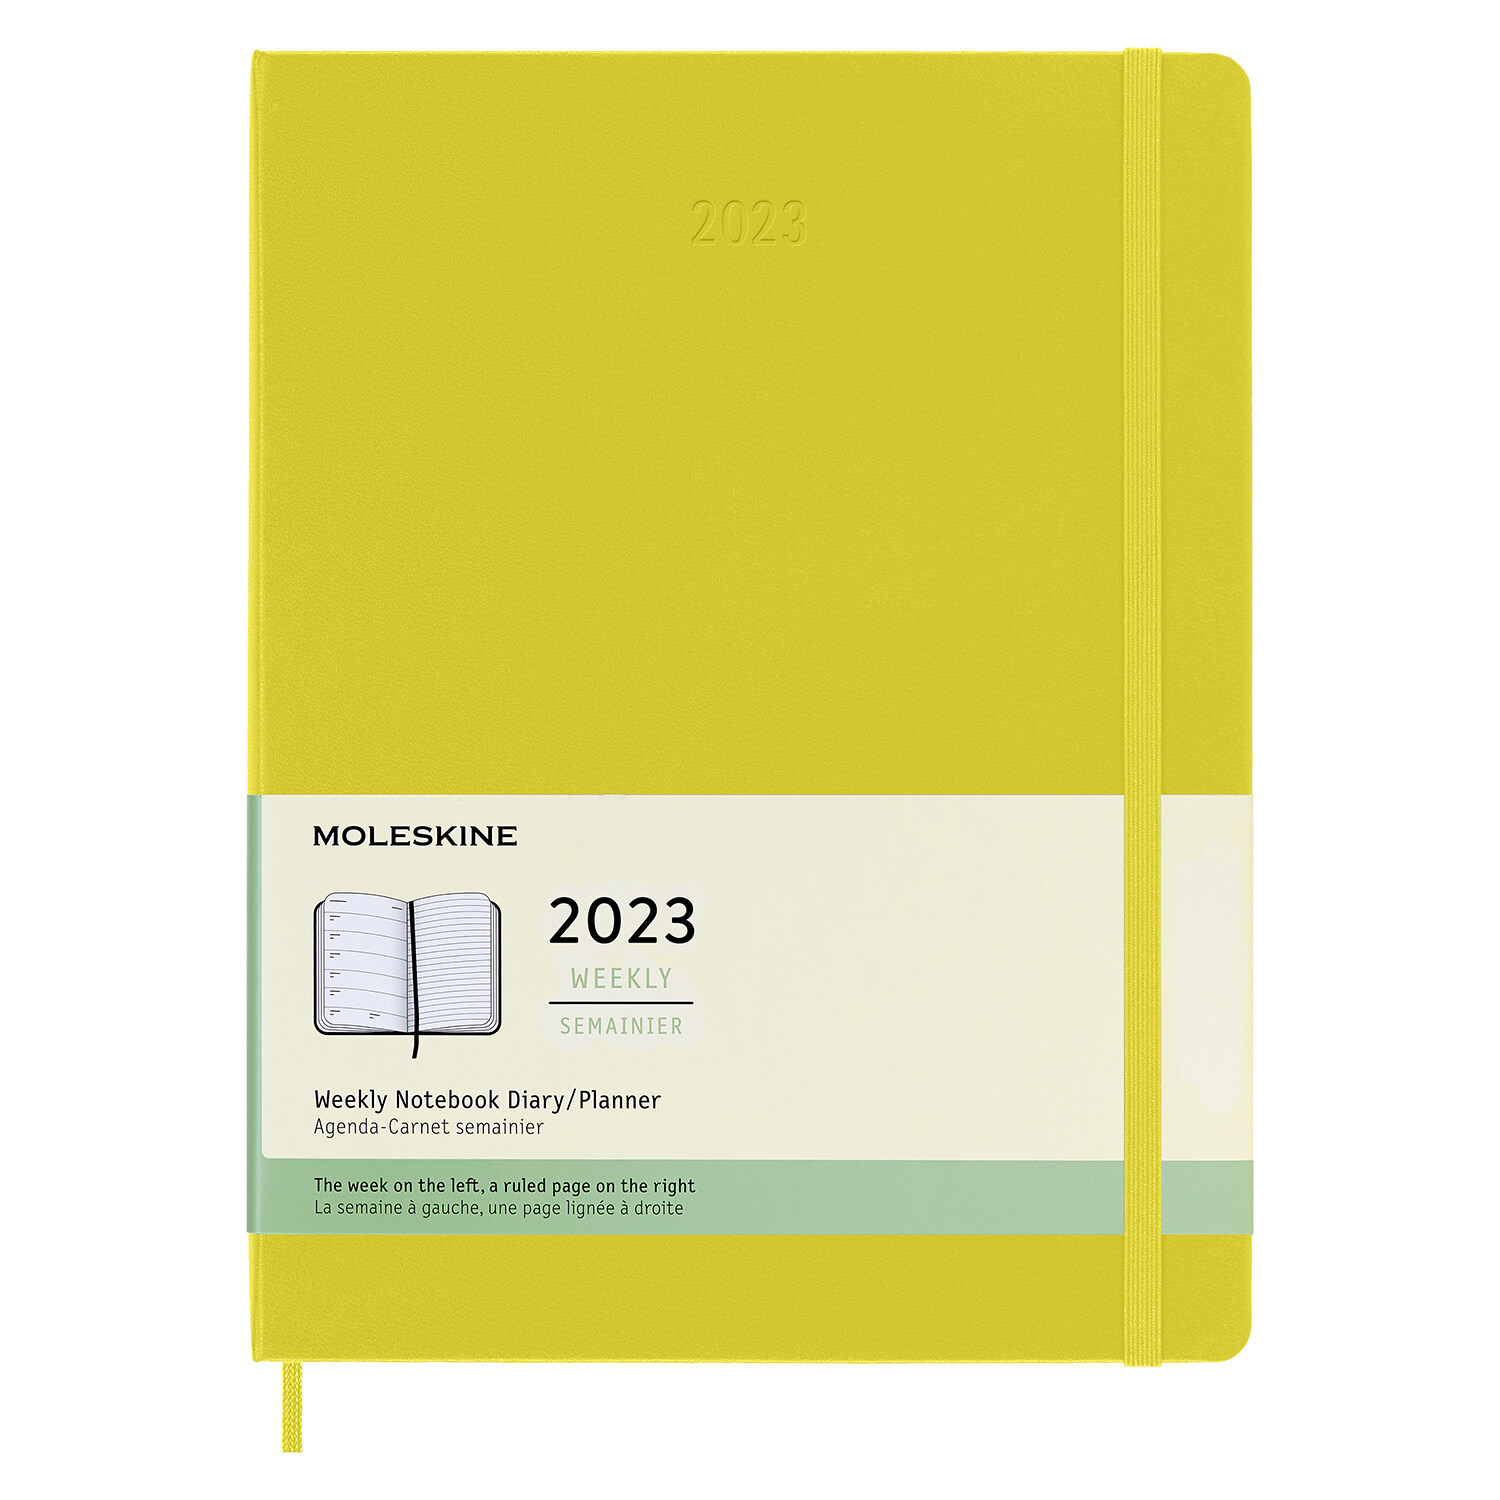 Moleskine 2023 Weekly Notebook Planner, 12m, Extra Large, Hay Yellow, Hard Cover (7.5 X 10) (Other)